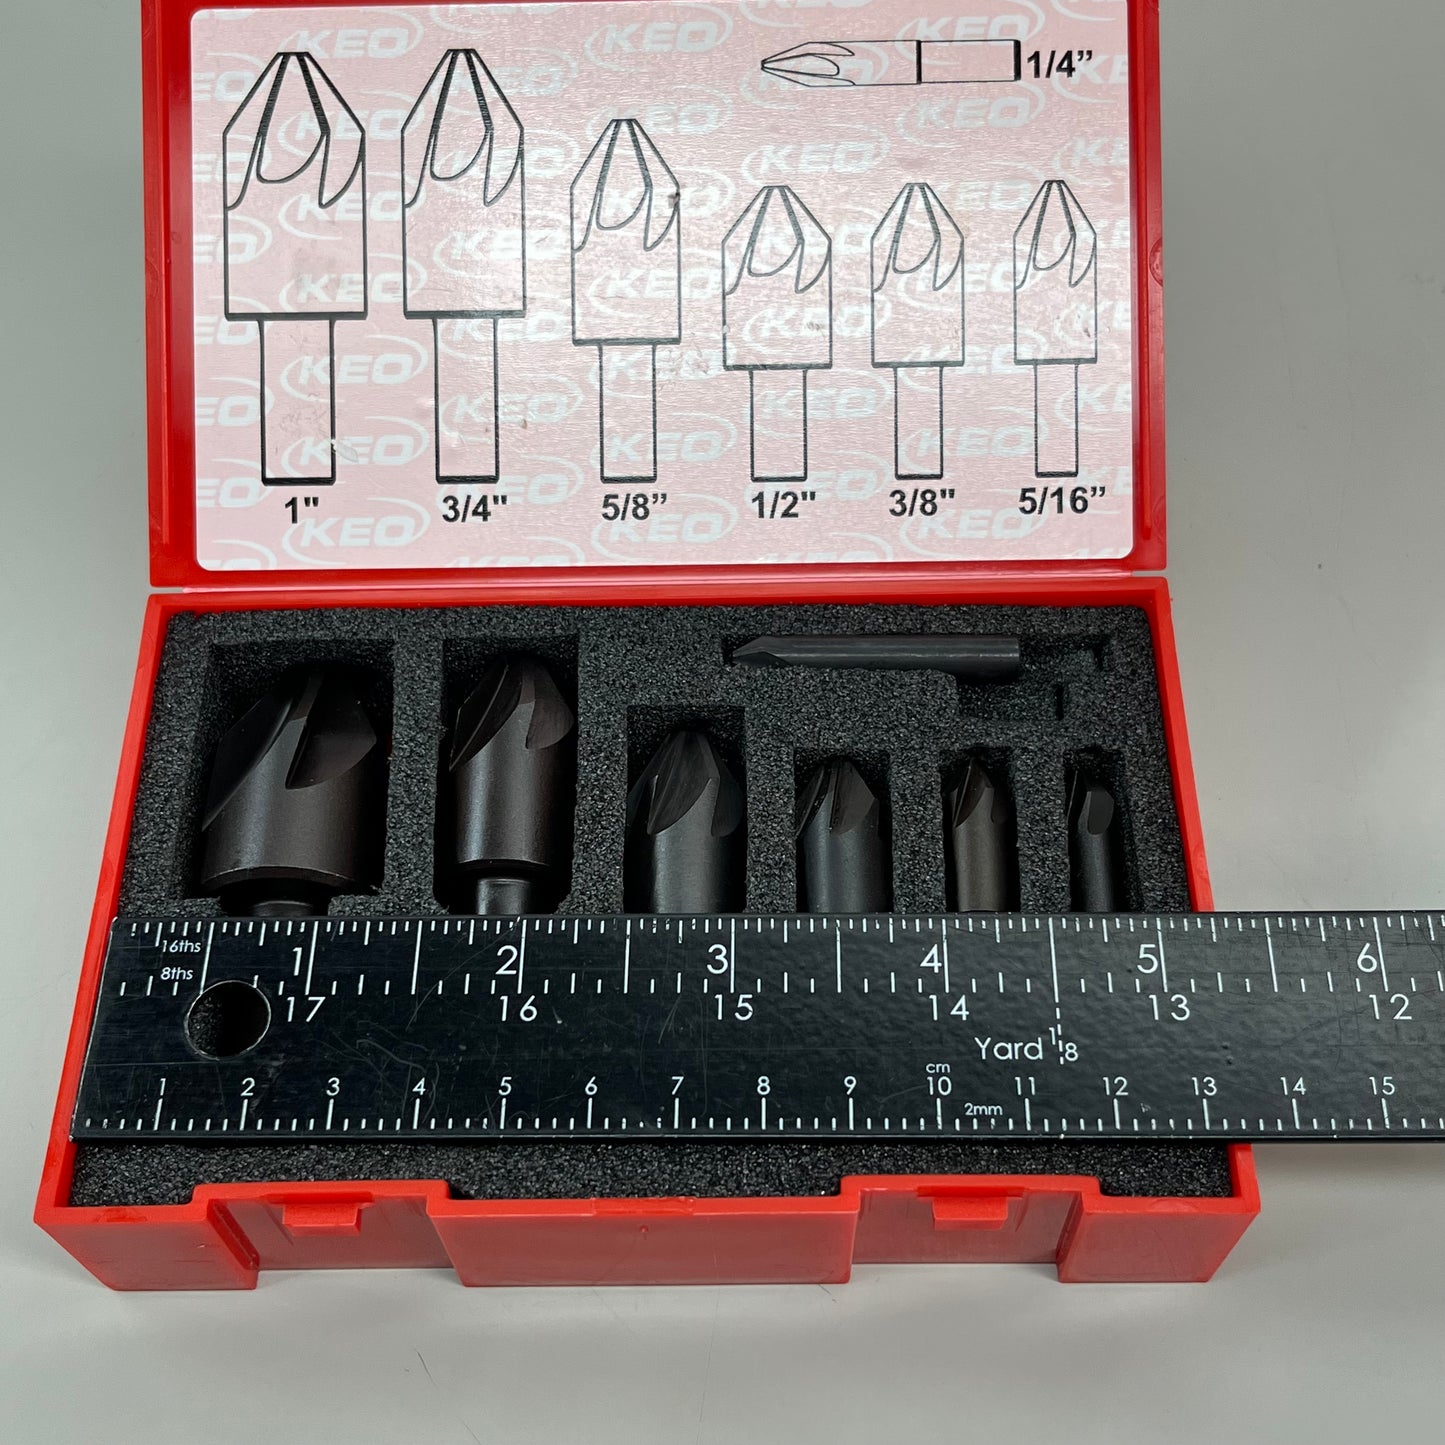 KEO Countersink High Speed Steel Bright (Uncoated) Finish 7 Piece Set Red Box 55018